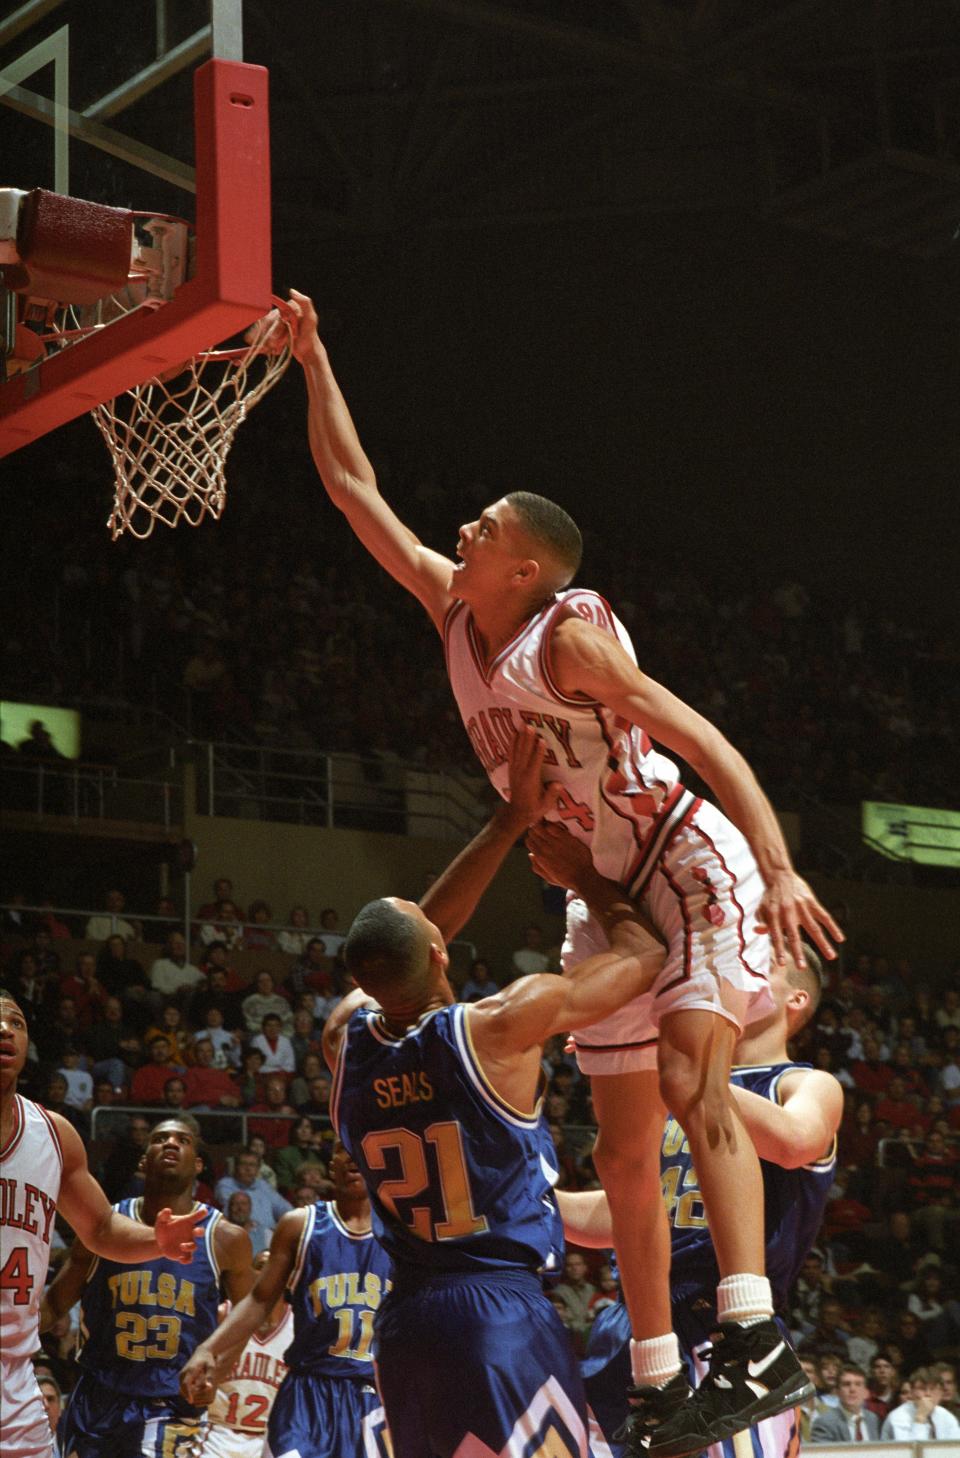 Anthony Parker dunks the ball during a Bradley men's basketball game at Carver Arena in Peoria.